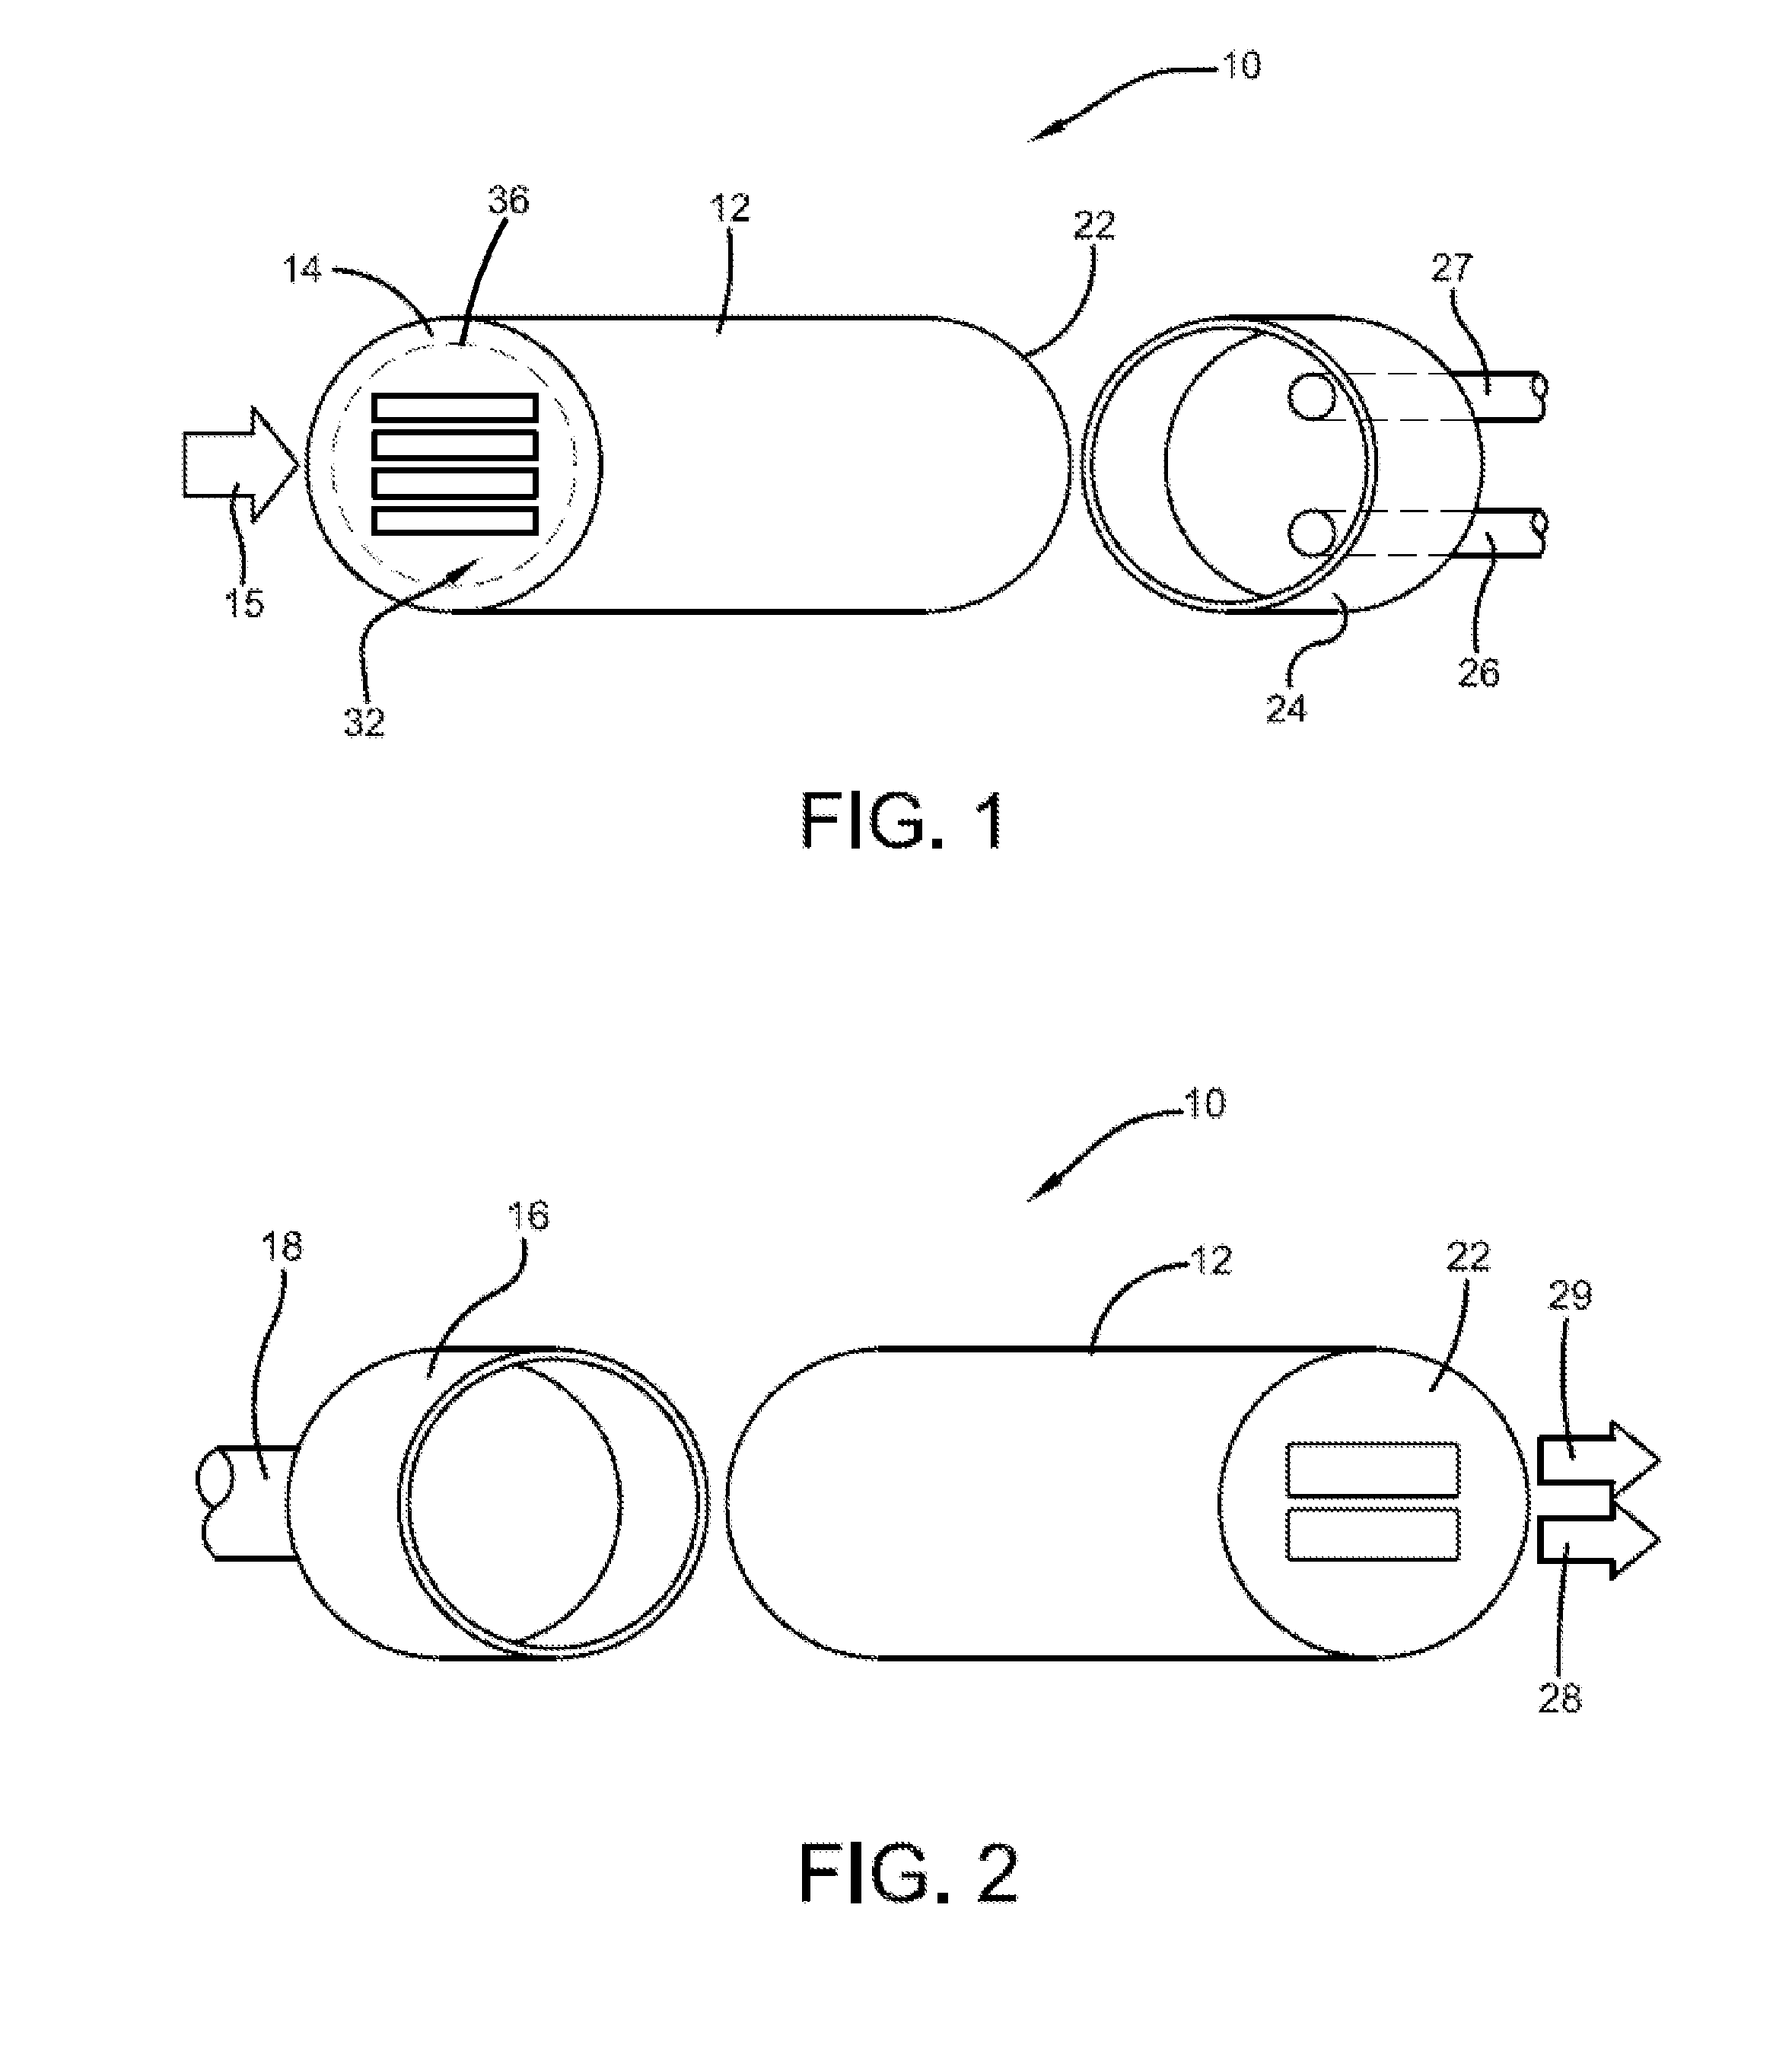 Planar filtration and selective isolation and recovery device